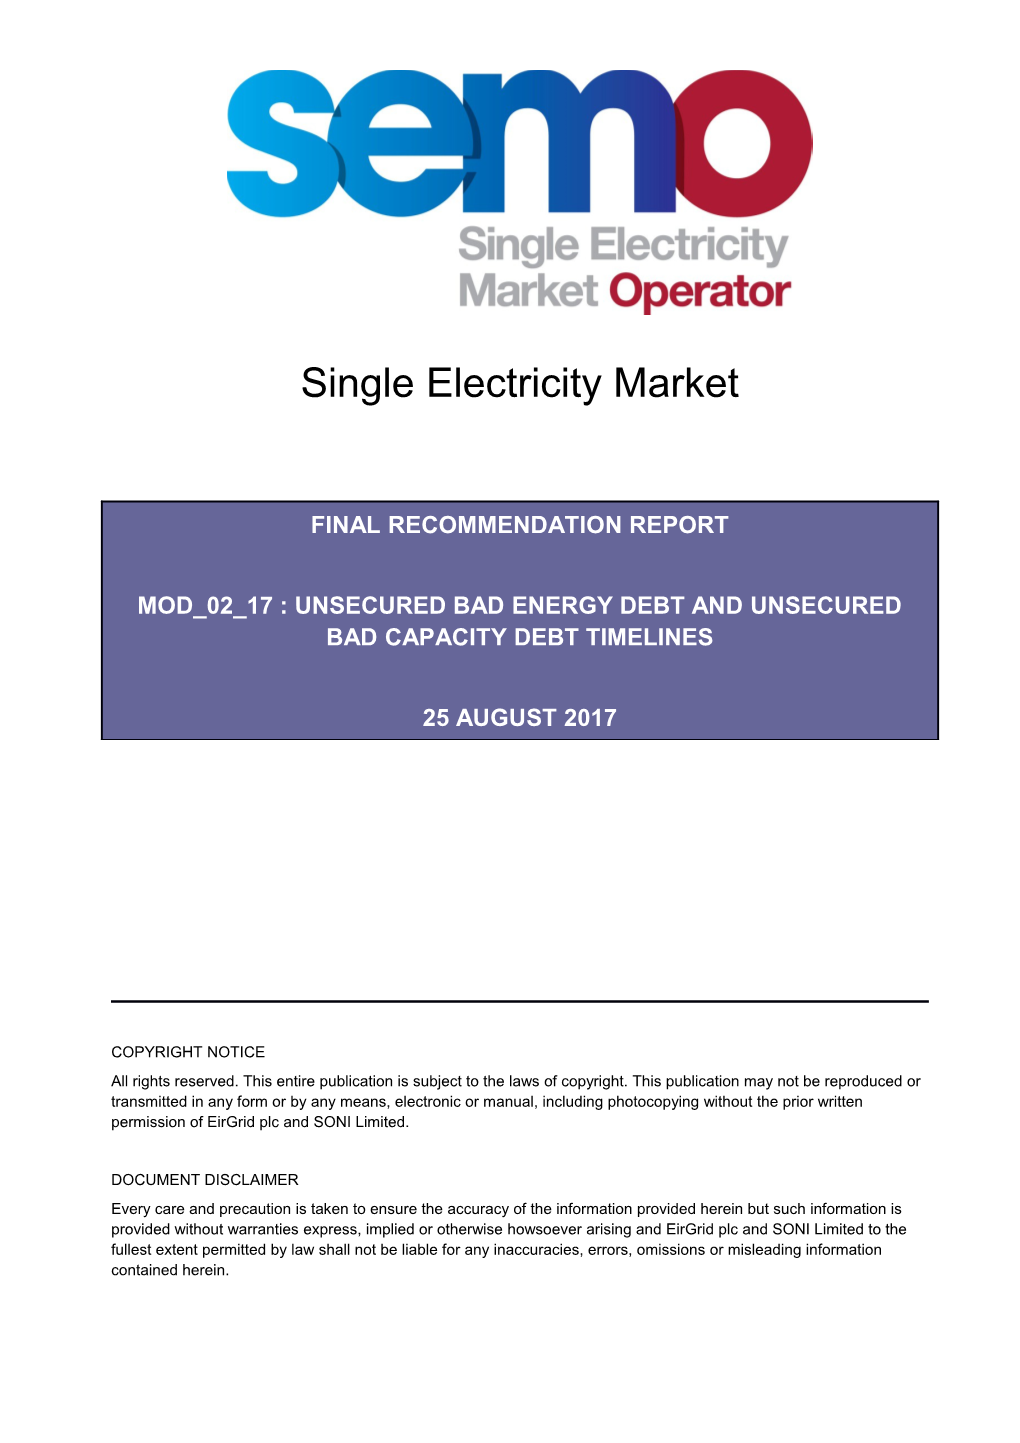 Final Recommendation Report Mod 02 17 Unsecured Bad Energy Debt